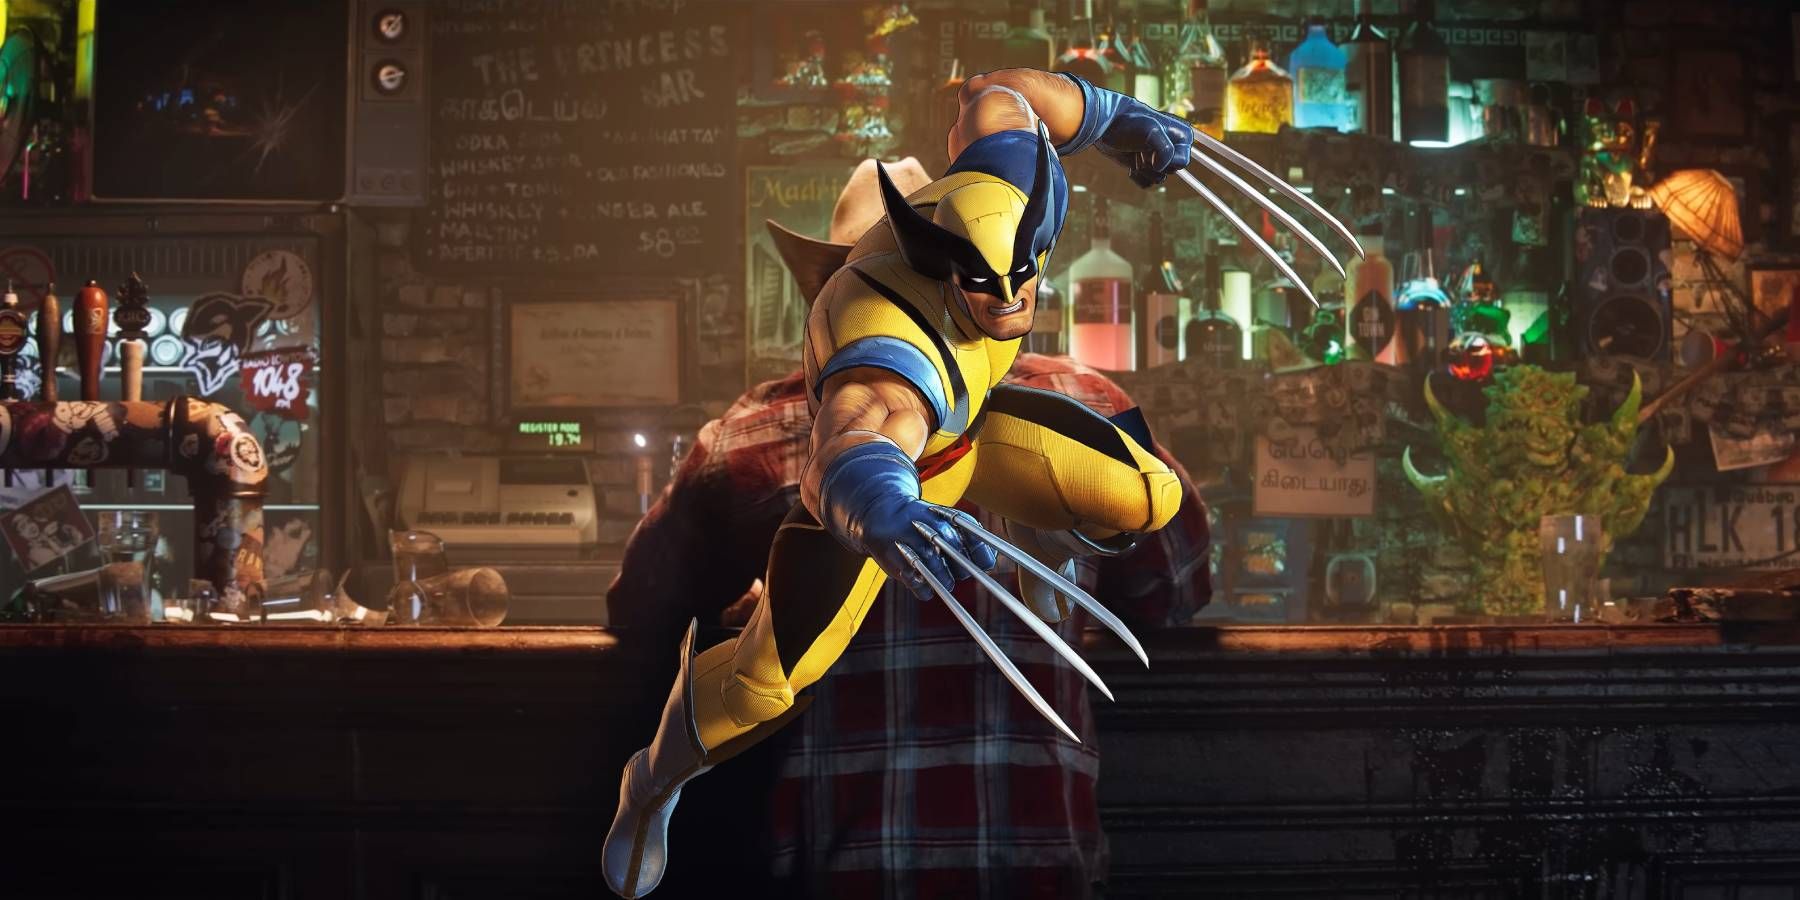 Wolverine from Ultimate Alliance 3 on a still from the reveal trailer for Marvel's Wolverine